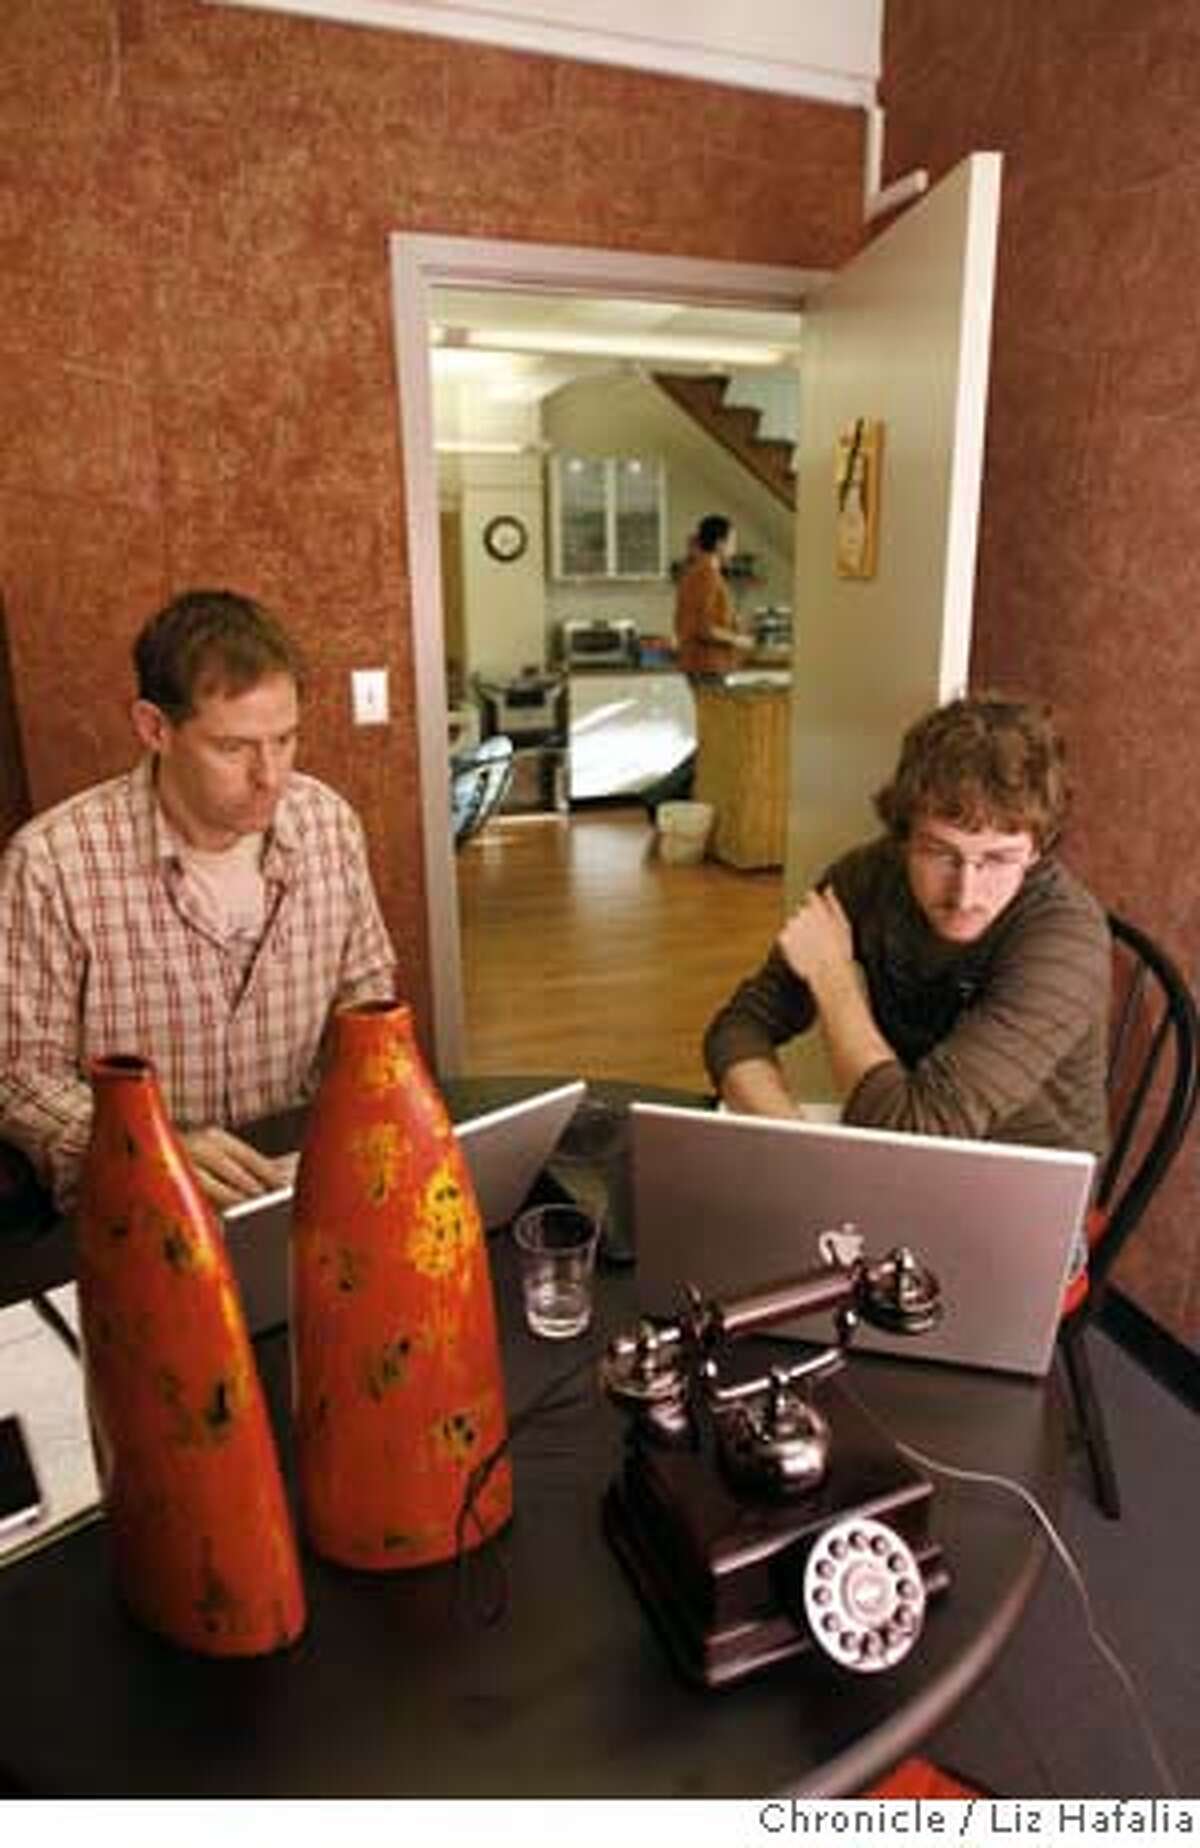 James Nicholson and David Pascual in the telephone room of Sandbox Suites, a co-working space. Photo by Liz Hafalia/San Francisco Chronicle Ran on: 02-19-2008 James Nicholson and David Pascual work in the telephone room of Sandbox Suites in San Francisco. It is one of a number of communal spaces that offer work areas to people without their own offices.